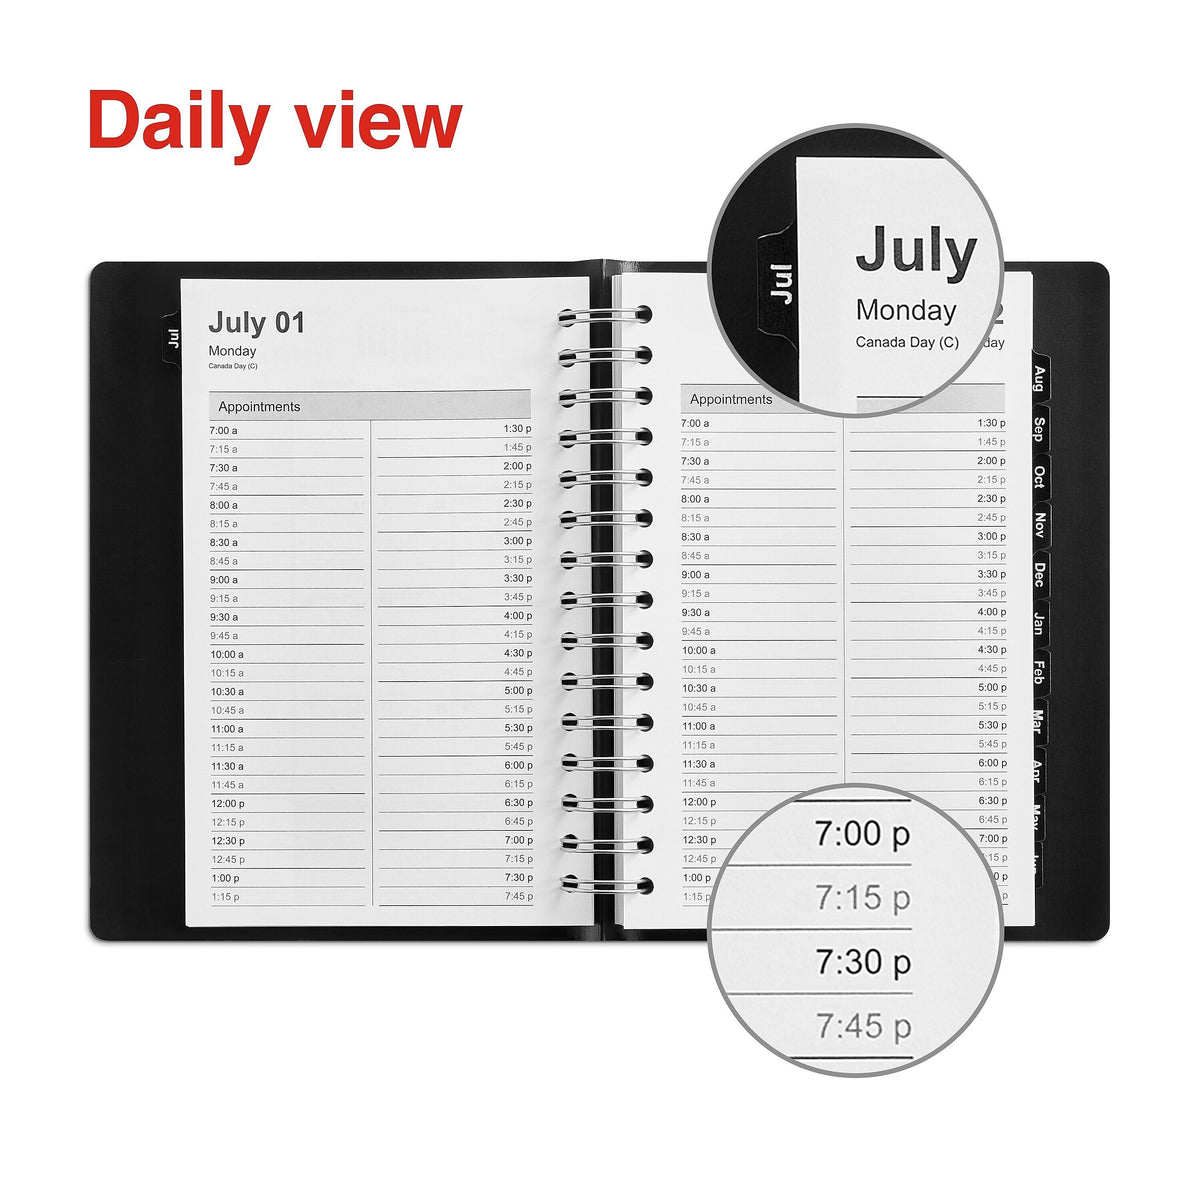 2024-2025 Staples 5" x 8" Academic Daily Appointment Book, Faux Leather Cover, Black